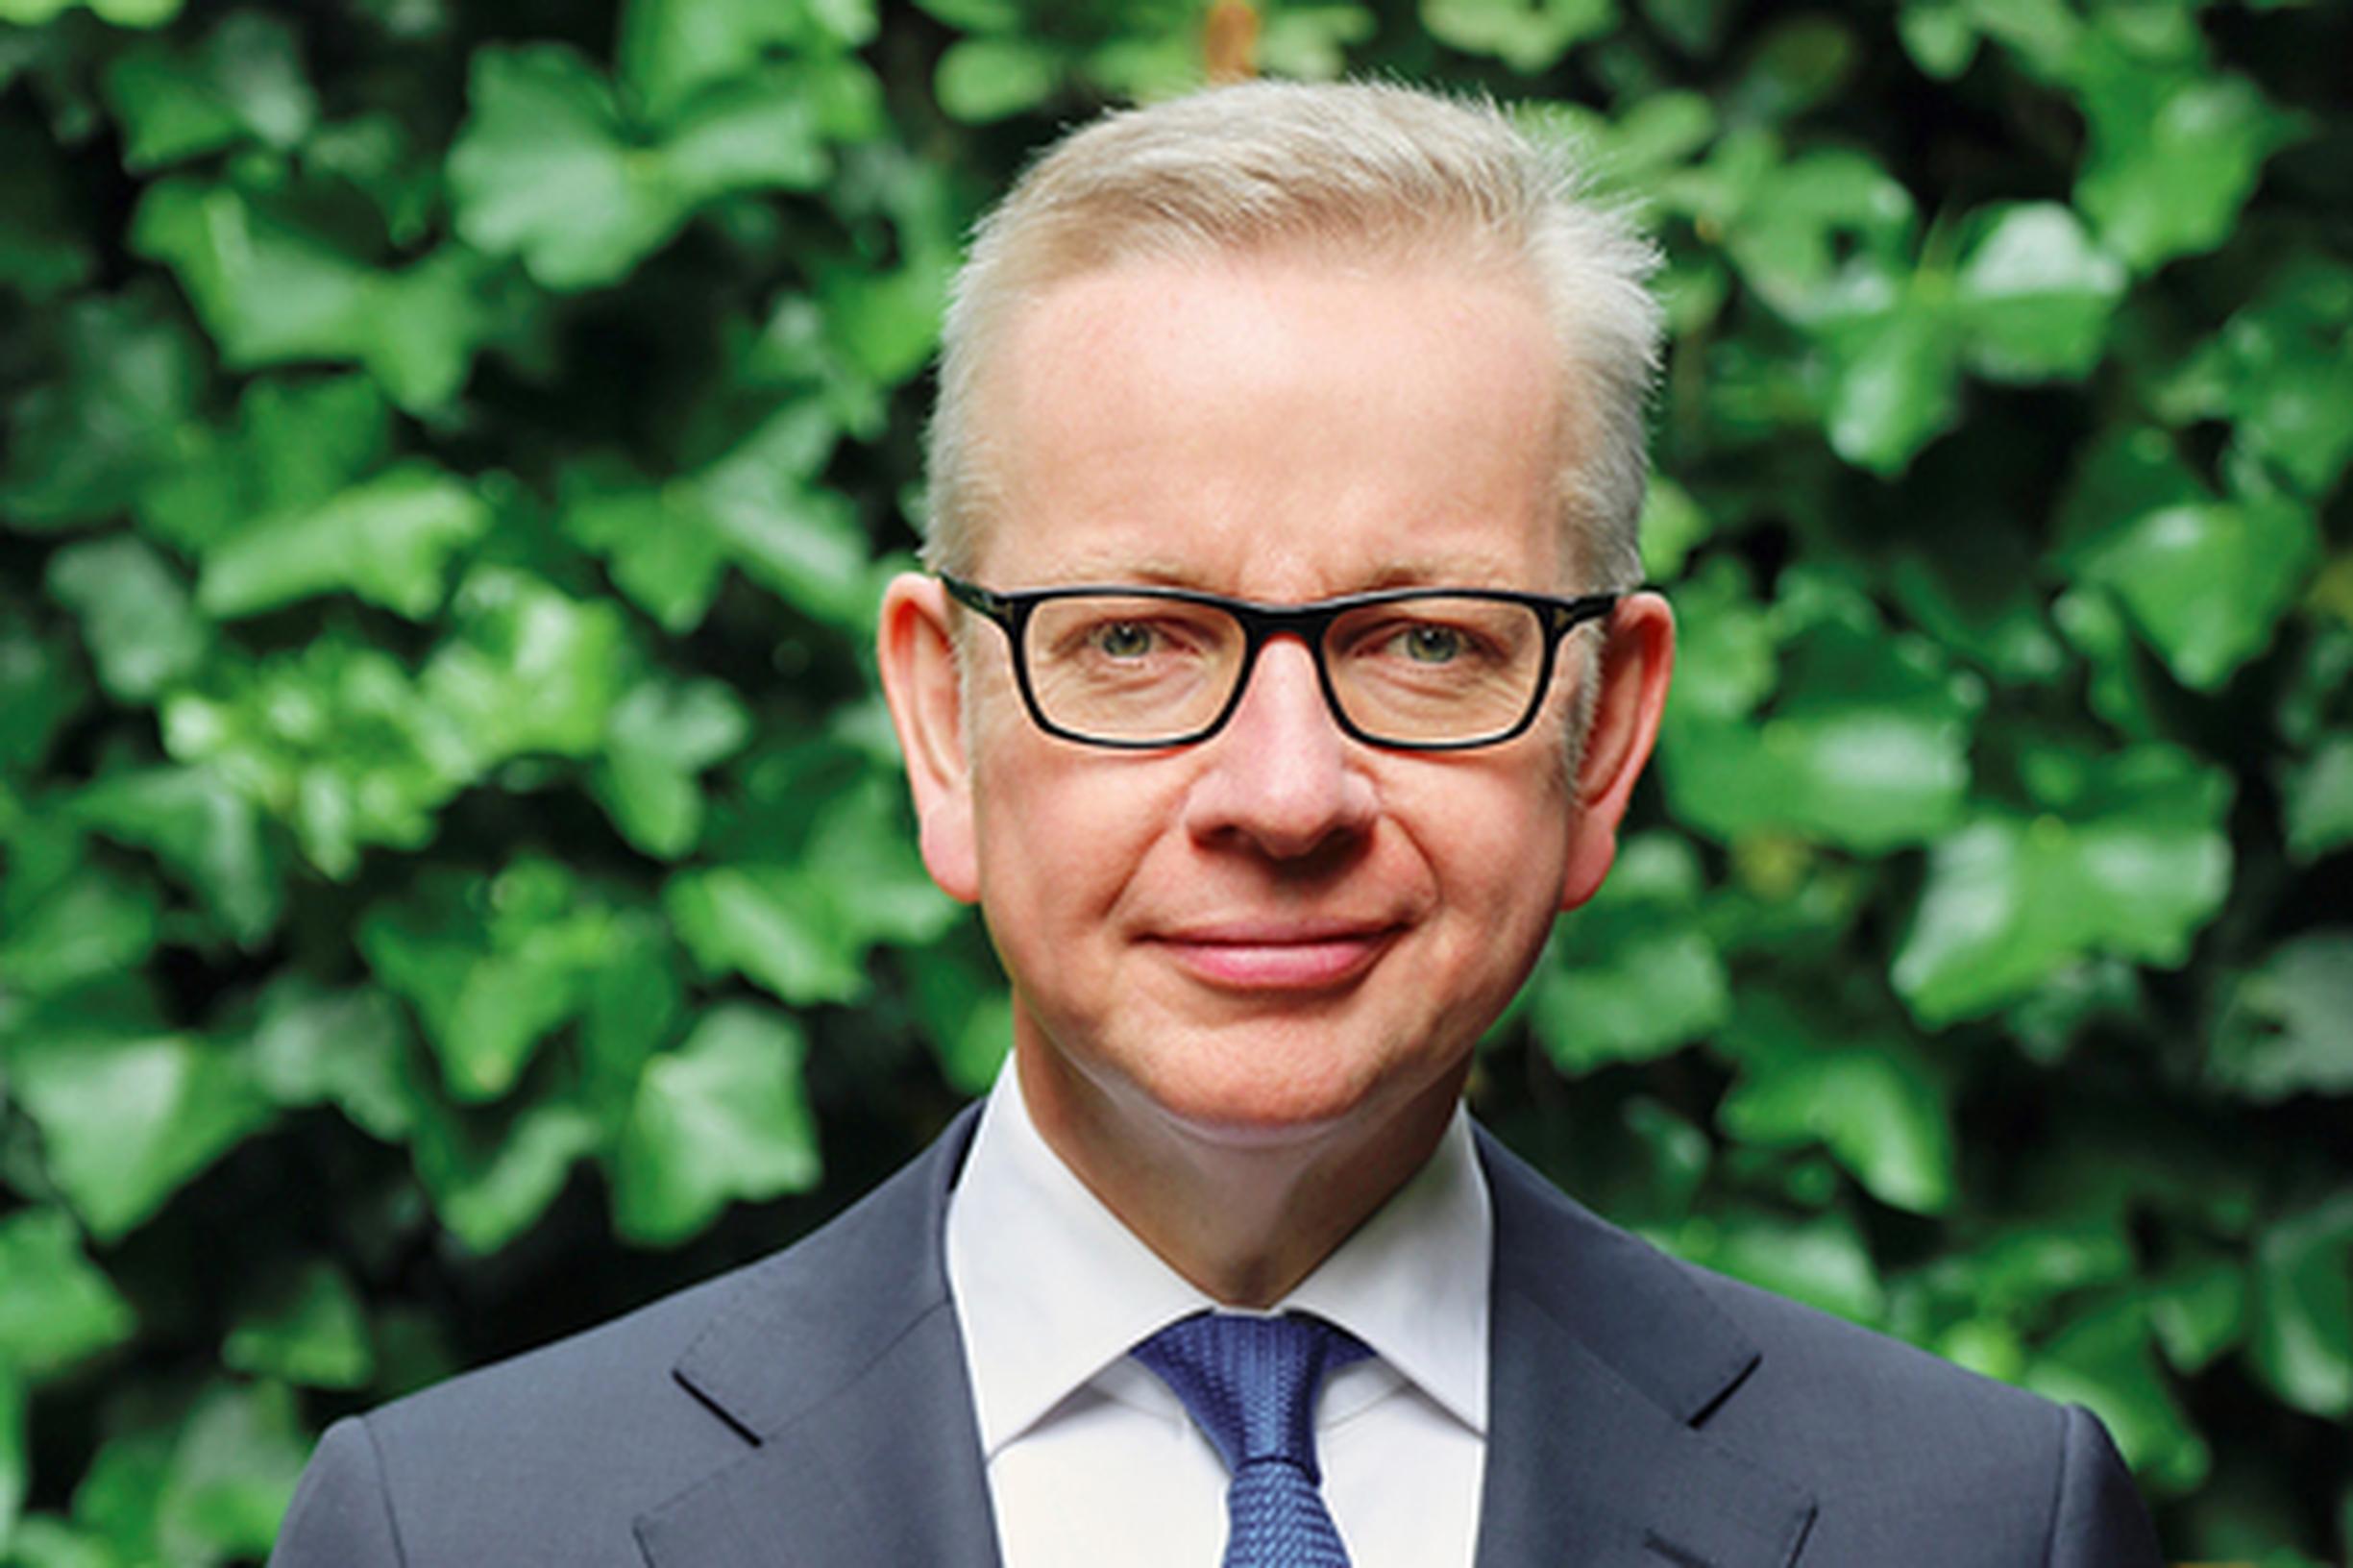 Michael Gove: We have some propositions to make sure that with the adoption of local plans, it will become more difficult for developers to wriggle out of their responsibilities